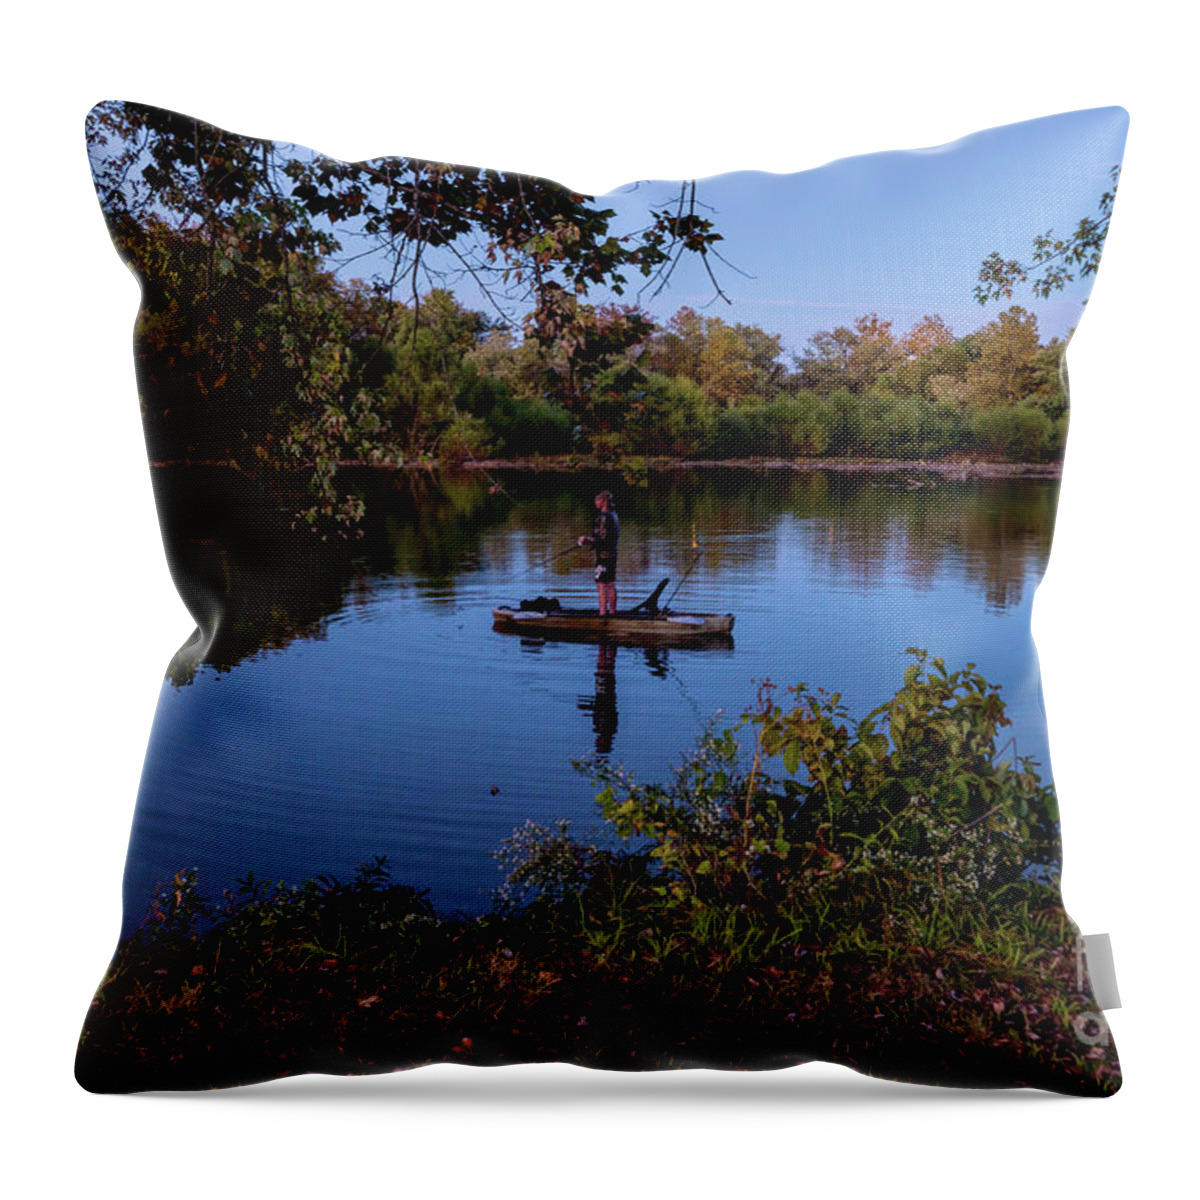 Fisherman Throw Pillow featuring the photograph Days End Fishing by Jennifer White